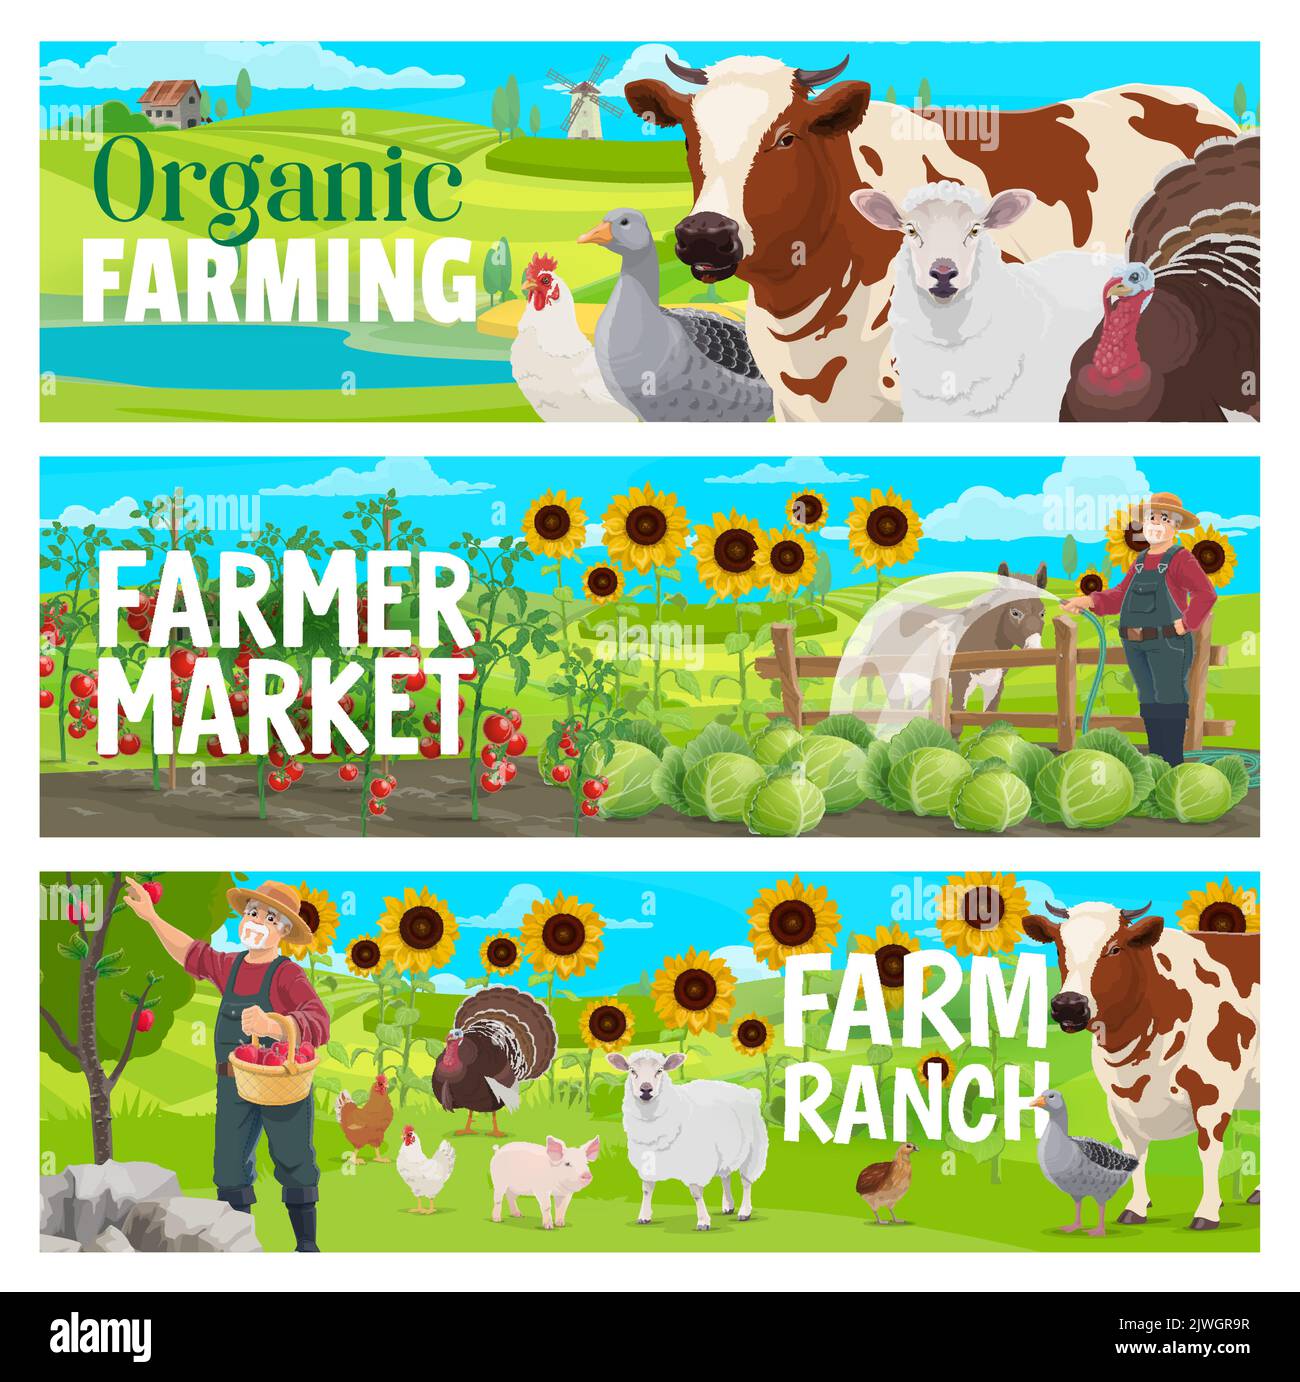 Organic farm and market. Farm animals, cattle, orchard and vegetables vector banners with cartoon farmer on farm field, cows, chickens, pigs and sheep, apples, tomatoes, cabbages, donkey and turkeys Stock Vector